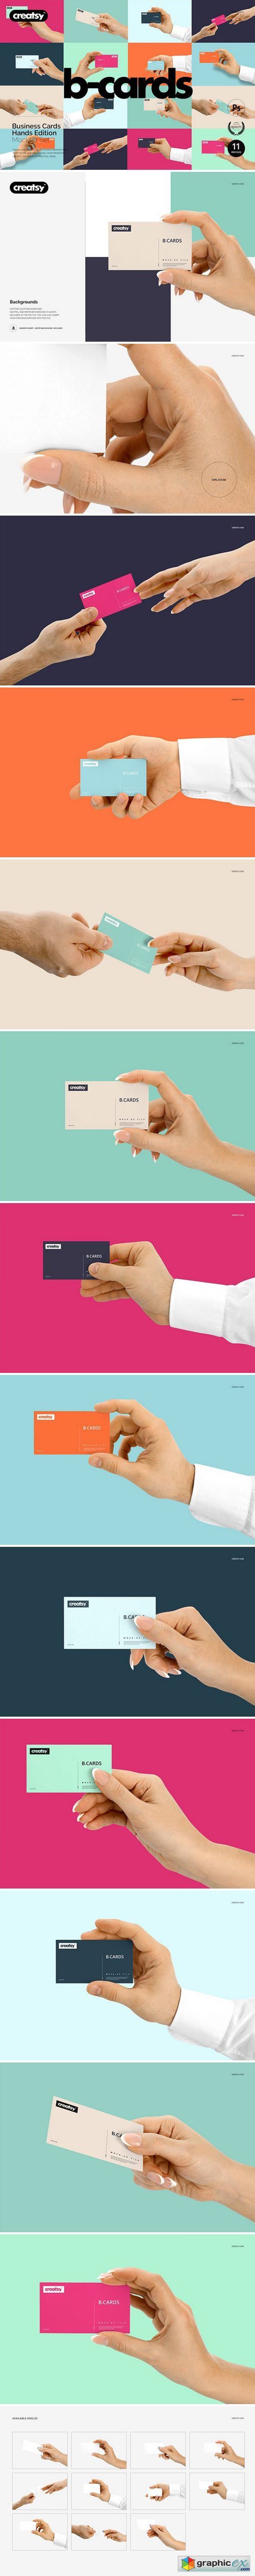 Business Cards Mockup Hands Edition